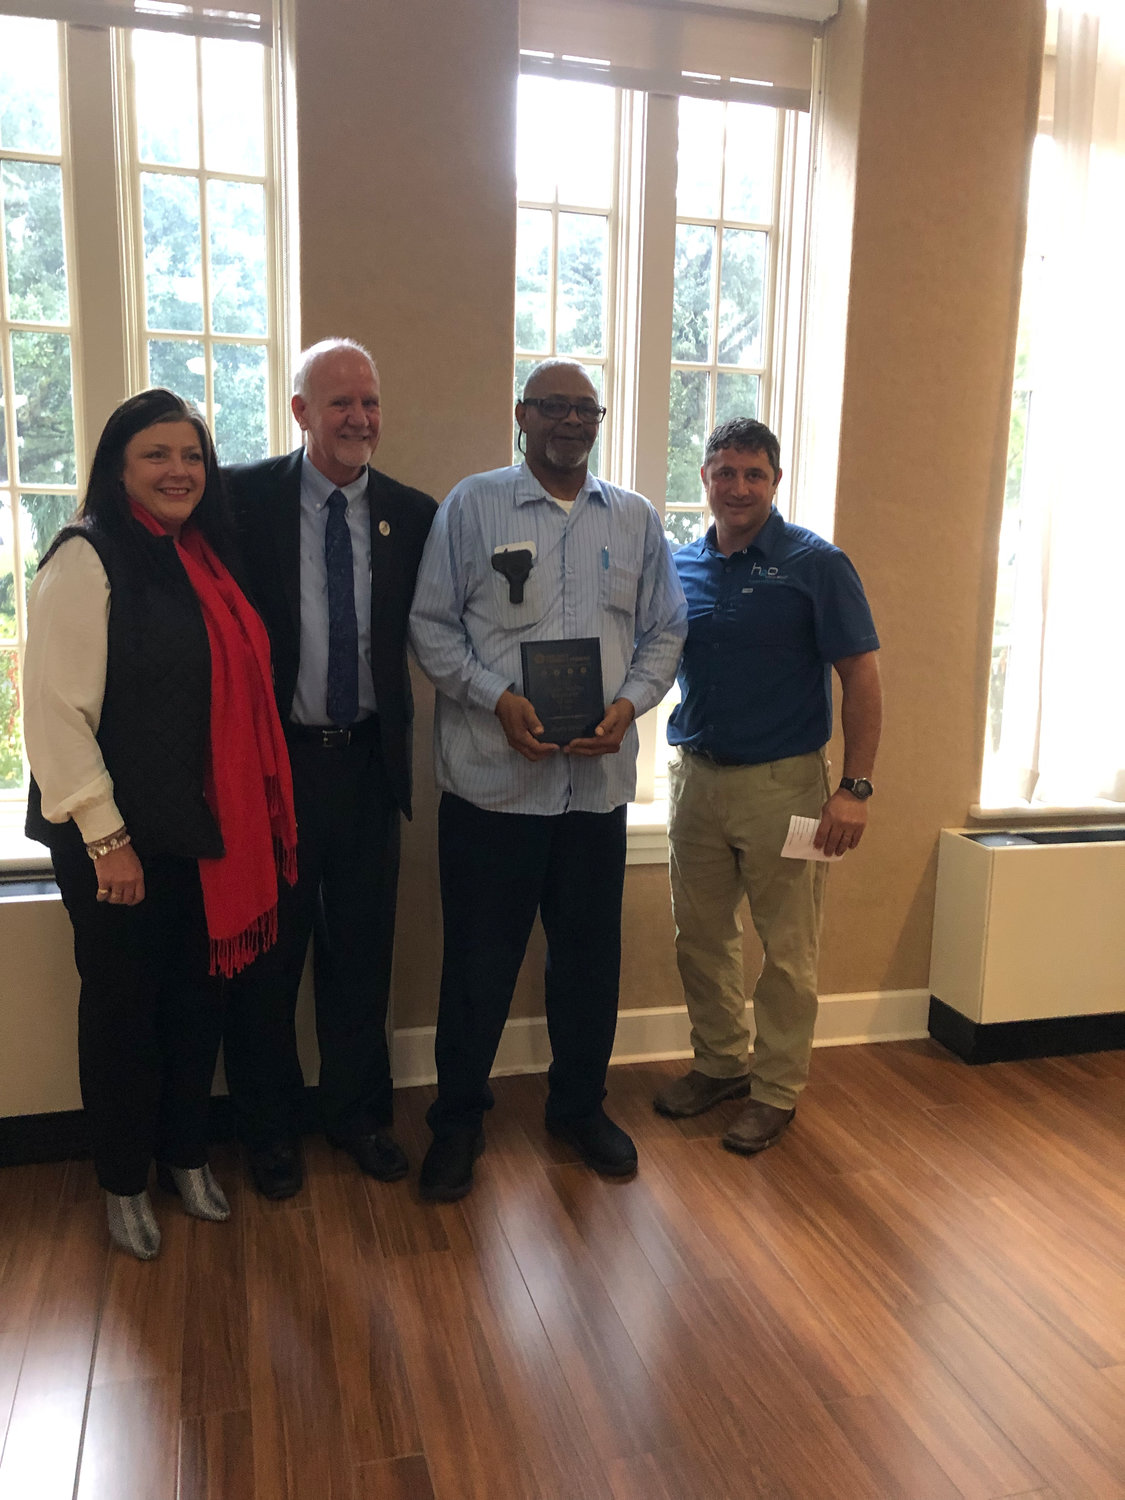 Pictured (l to r) are Long Beach Chamber of Commerce Chair Melissa Rae Seymour, Mayor George Bass, 2022 Utility Person of the Year award recipient Avery Taylor, and Joe Culpepper from h20 Innovation.